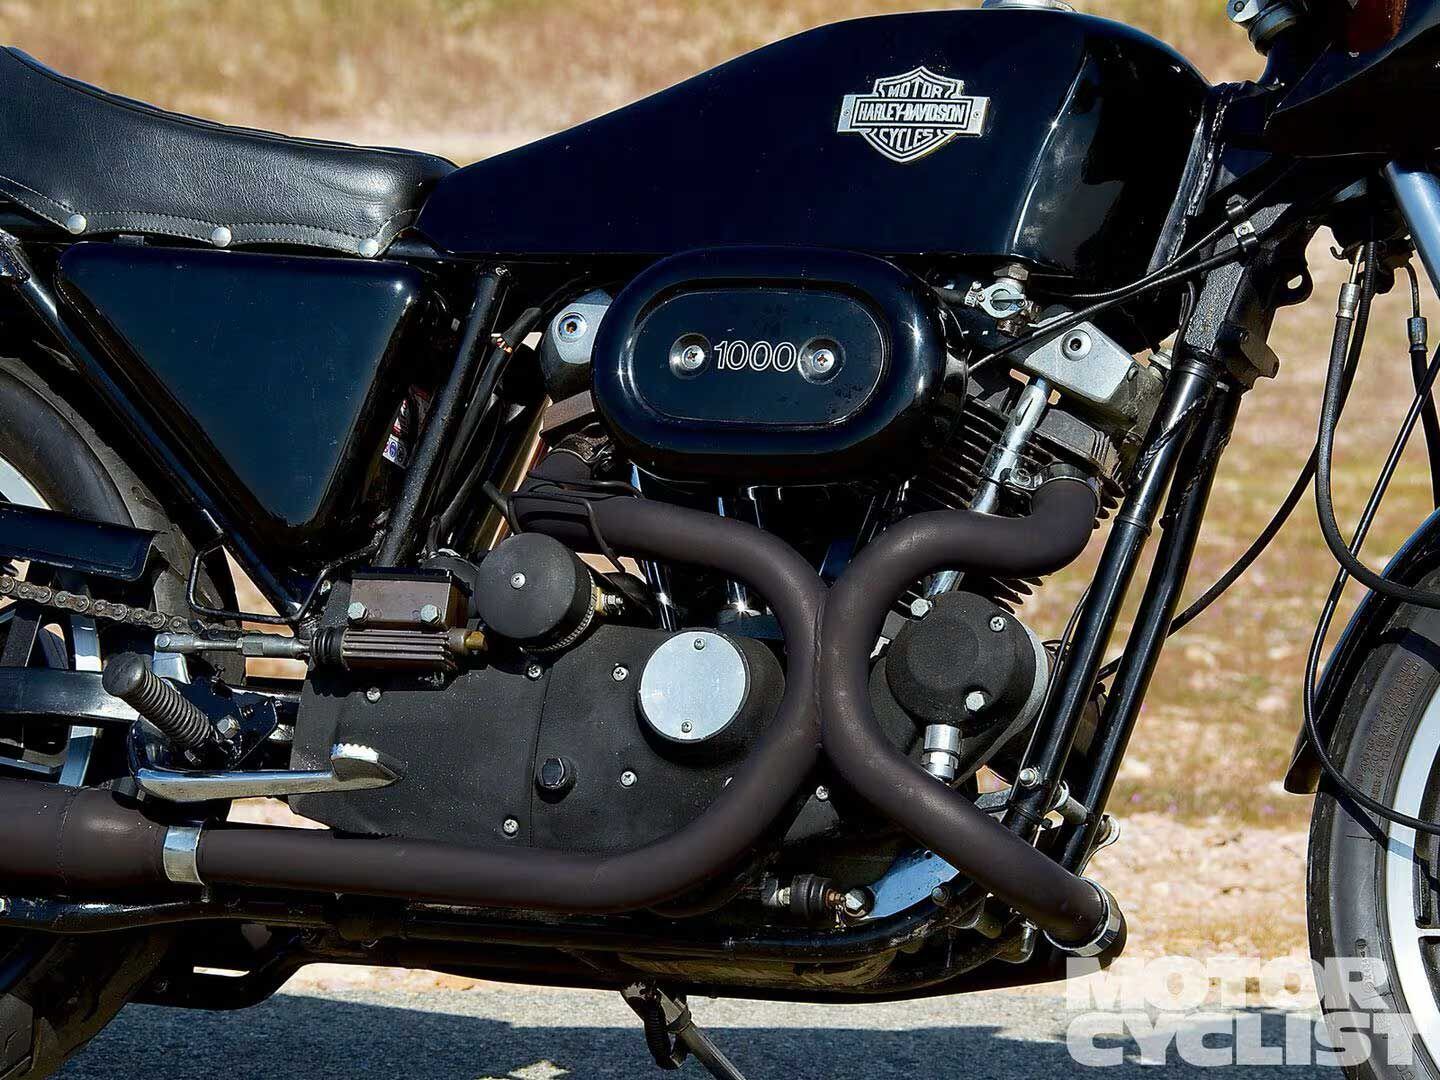 Despite the “Siamese” exhaust headers and striking design, the Harley-Davidson XLCR only sold around 3,130 units in three years.